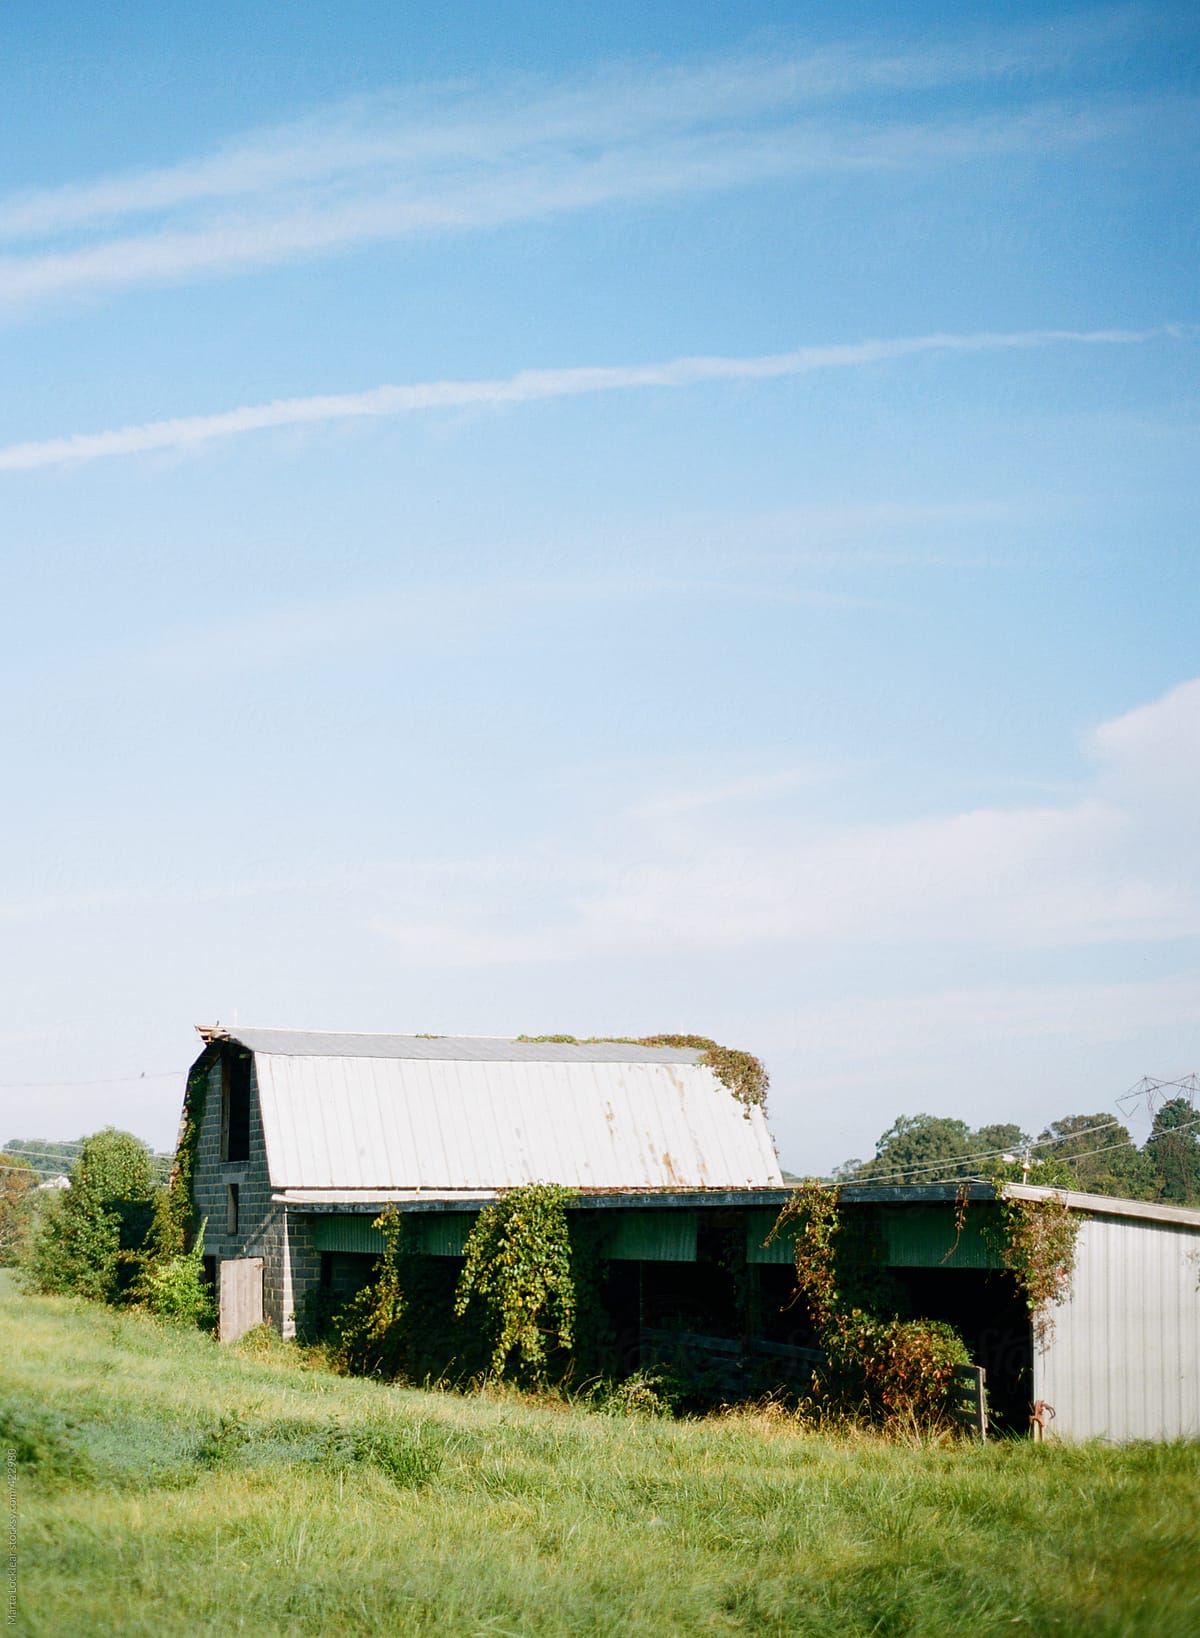 Landscape image of an old run down cattle barn